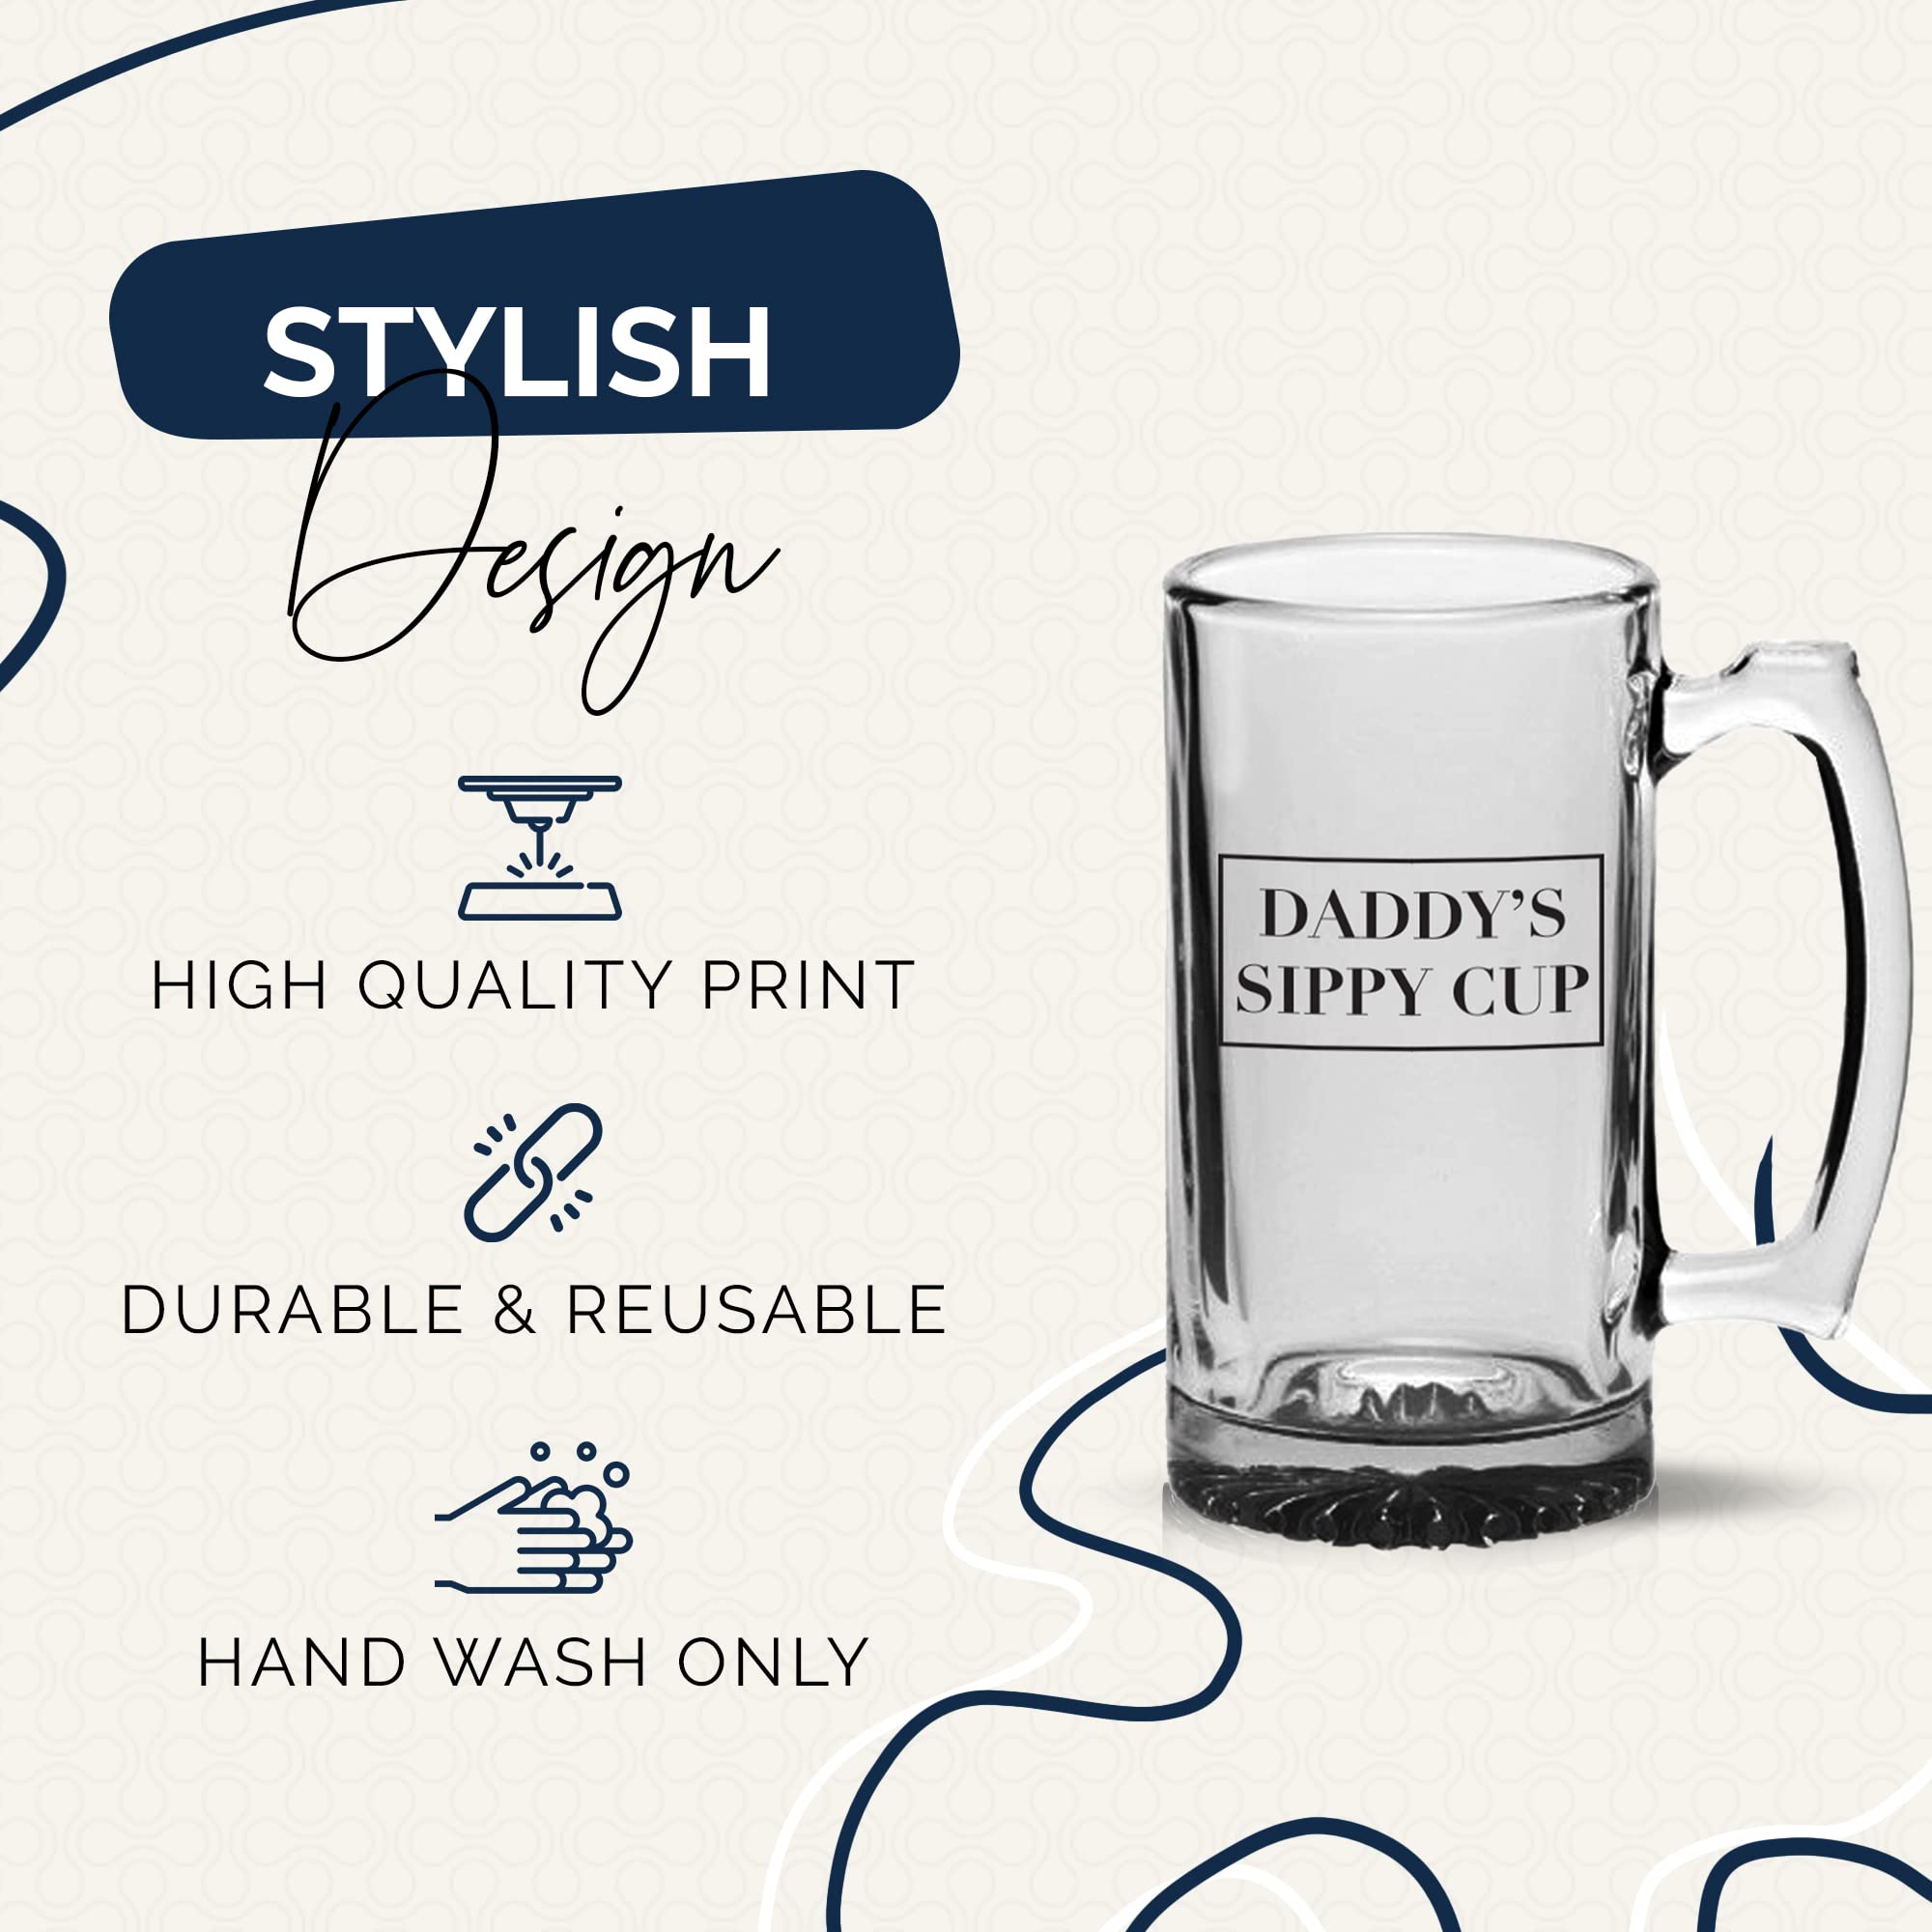 Your Dream Party Shop Daddy's Sippy Cup Beer Glass - 16oz Beer Mug - Funny New Dad Gifts For Men - Ideal Gifts For New Dad or Dad to Be Gifts - 1st Time Dad Gifts for Expecting Dad's - Handle